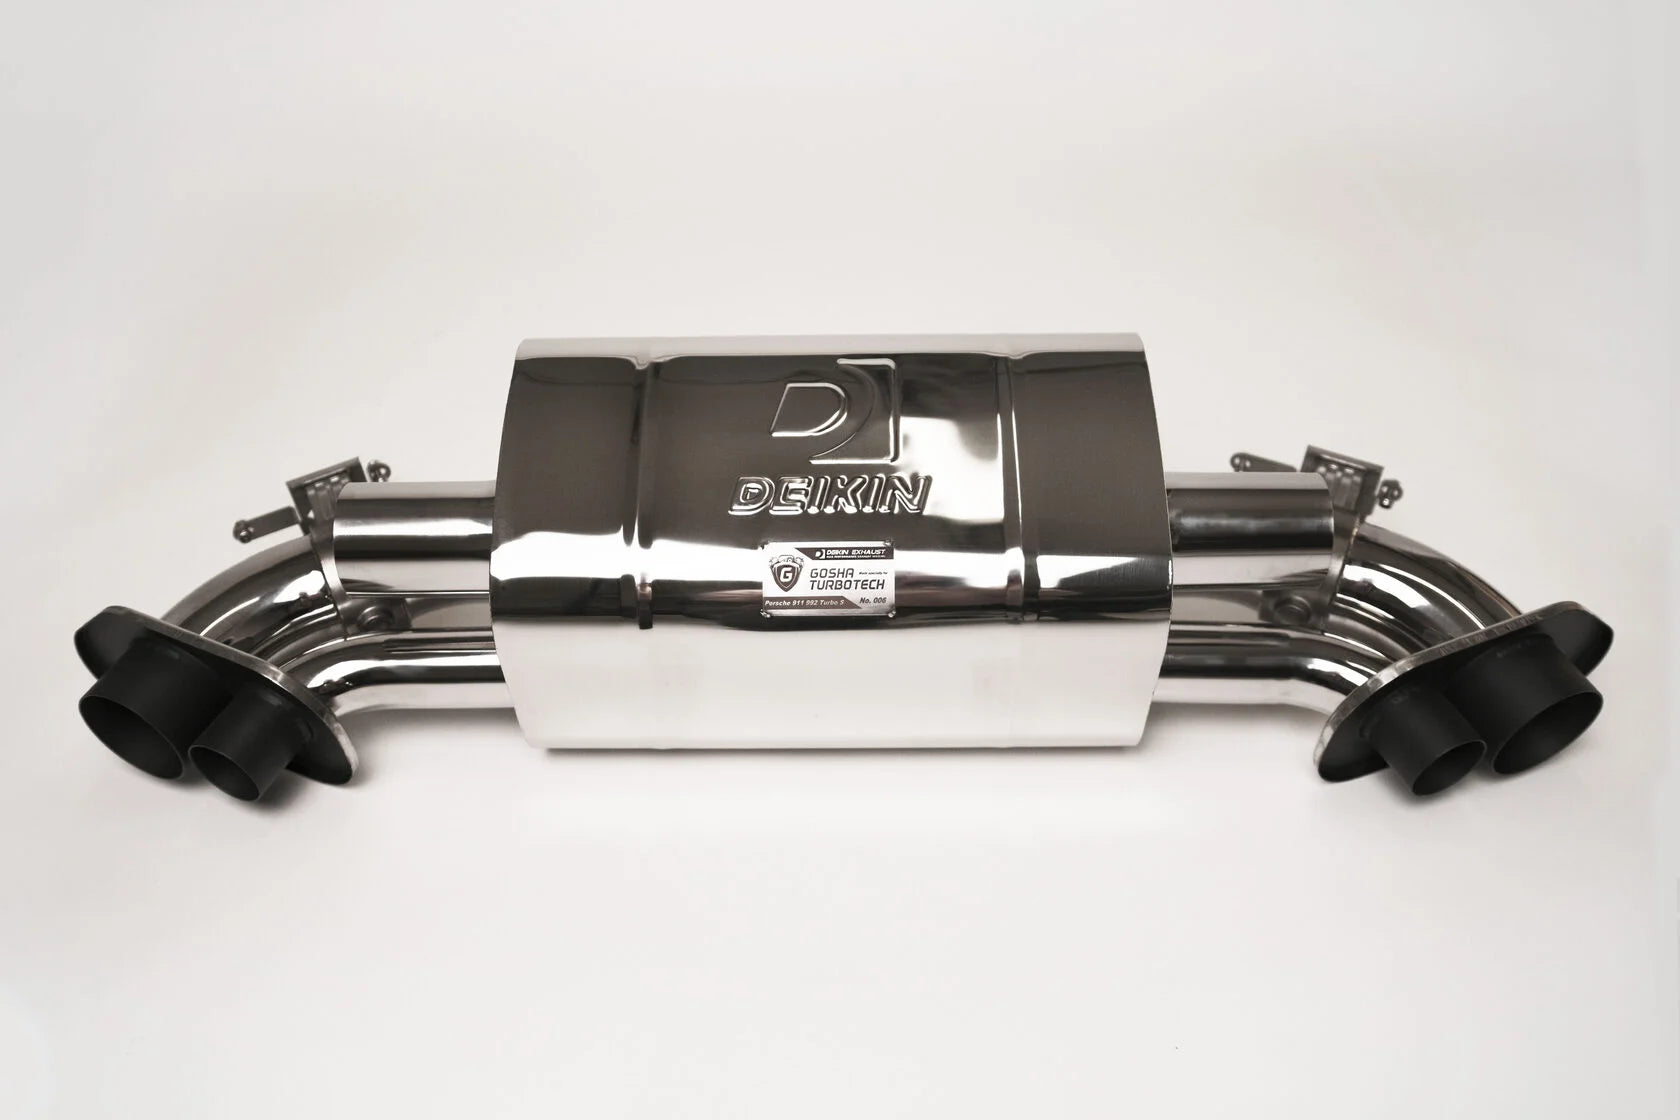 DEIKIN 10-PO.911.T/TS.992.S-ES-SS-DPT-00 Exhaust system "Street" Stainless steel for Porsche 911 Turbo/Turbo S (992) complete with downpipes HeatShield Photo-0 